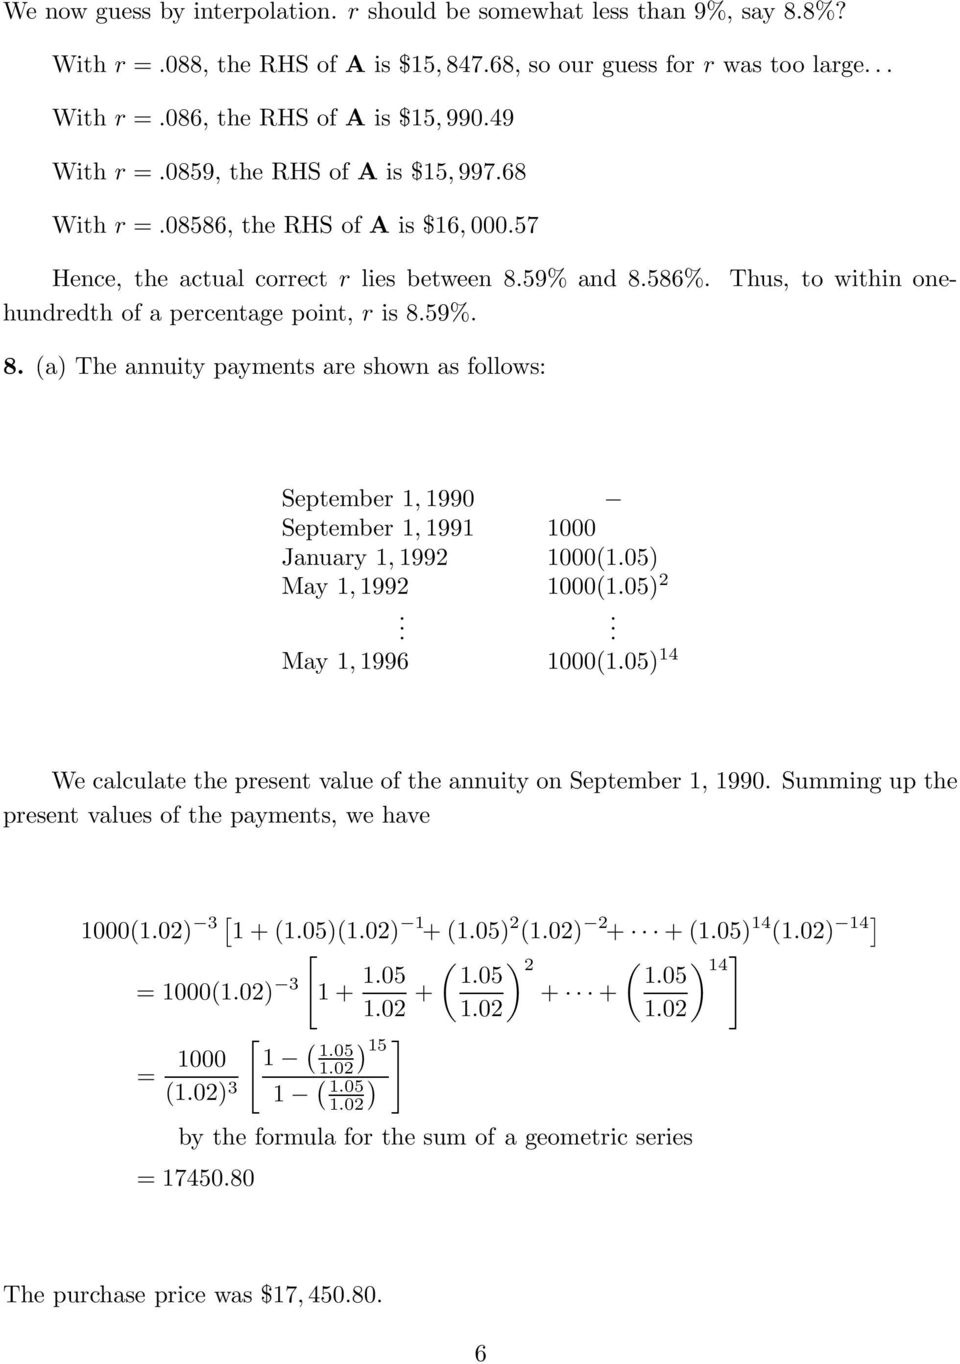 hundredth of a percentage point, r is 8.59%. 8. a) The annuity payments are shown as follows: September 1, 1990 September 1, 1991 1000 January 1, 1992 10001.05) May 1, 1992 10001.05) 2.